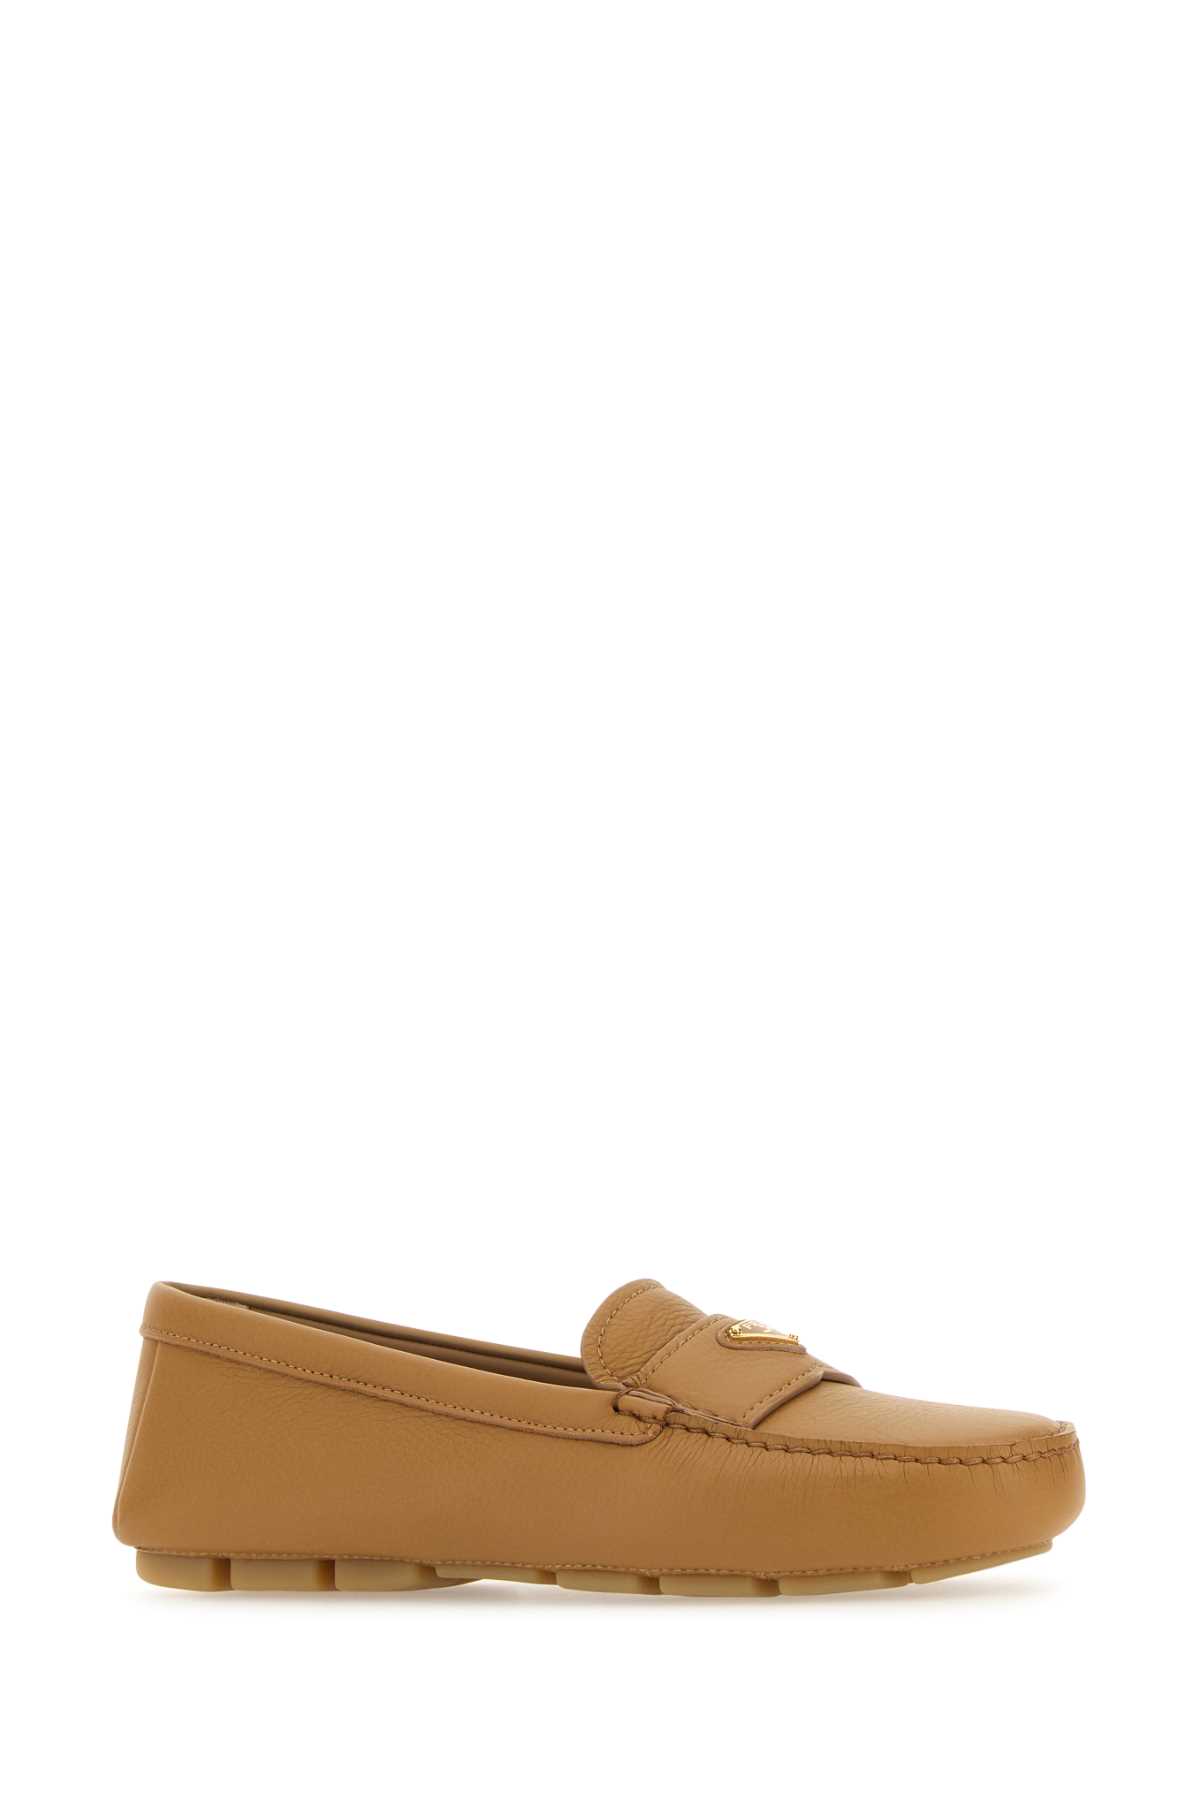 Prada Camel Leather Loafers In Naturale